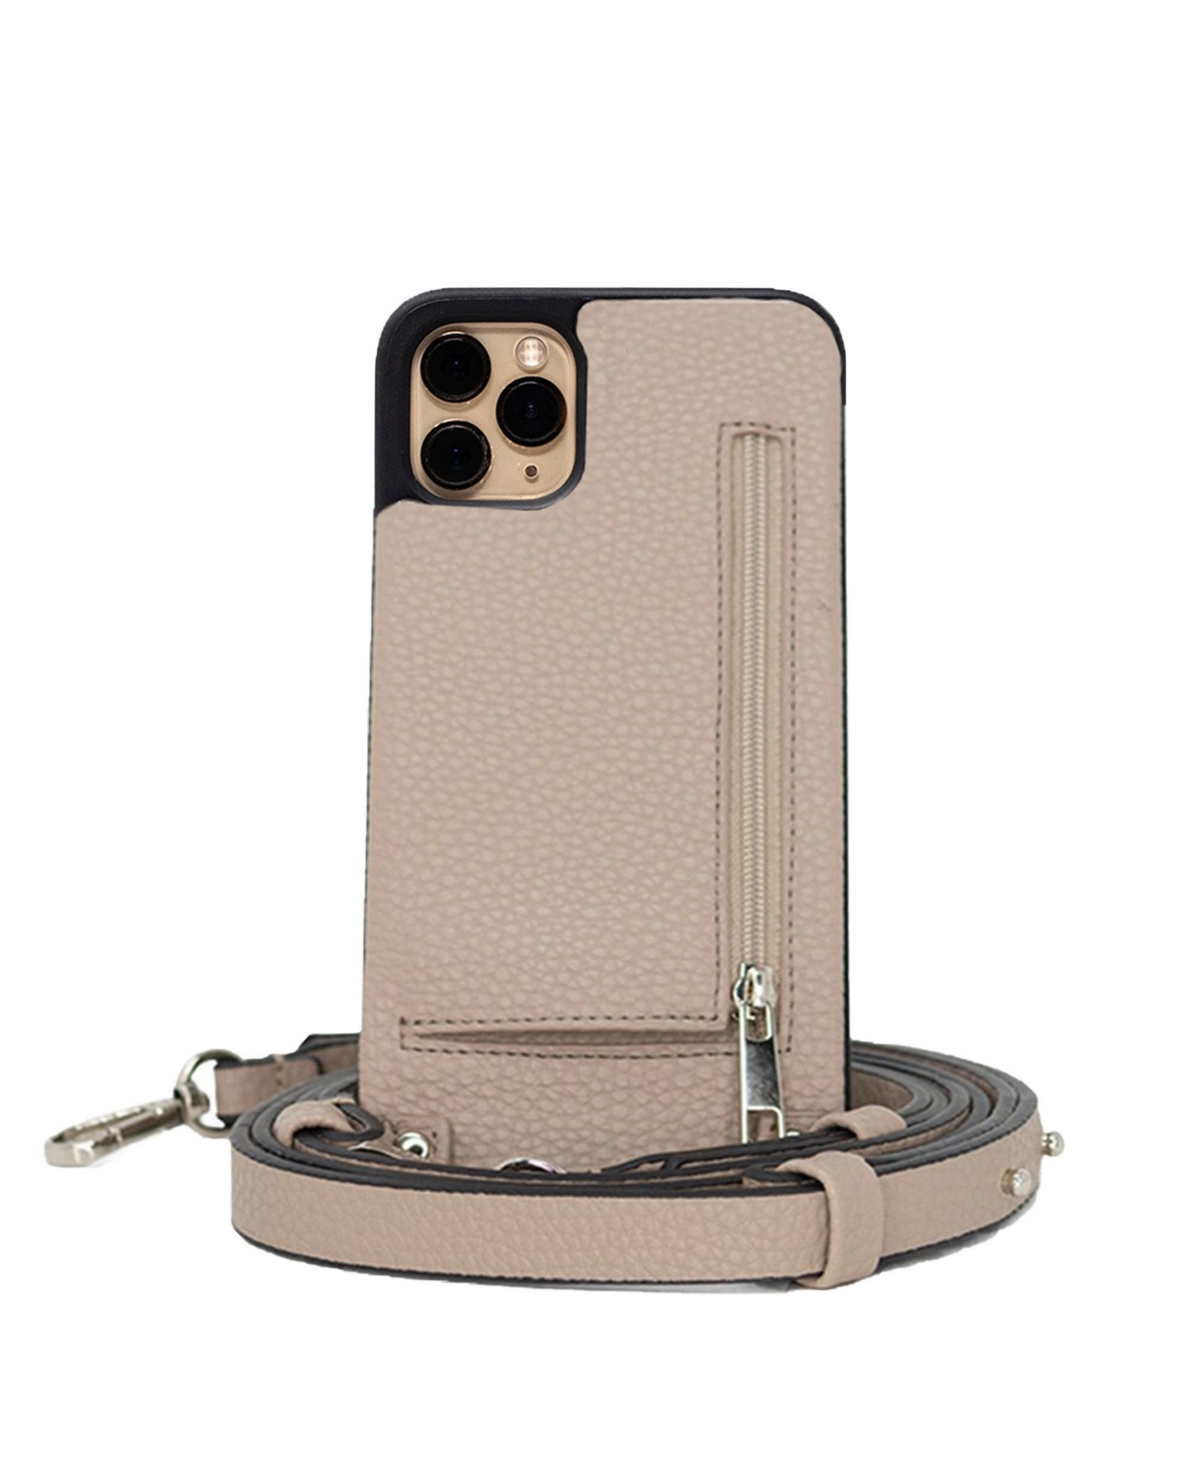 Hera Cases Iphone 11 Pro Max Case with Strap Wallet